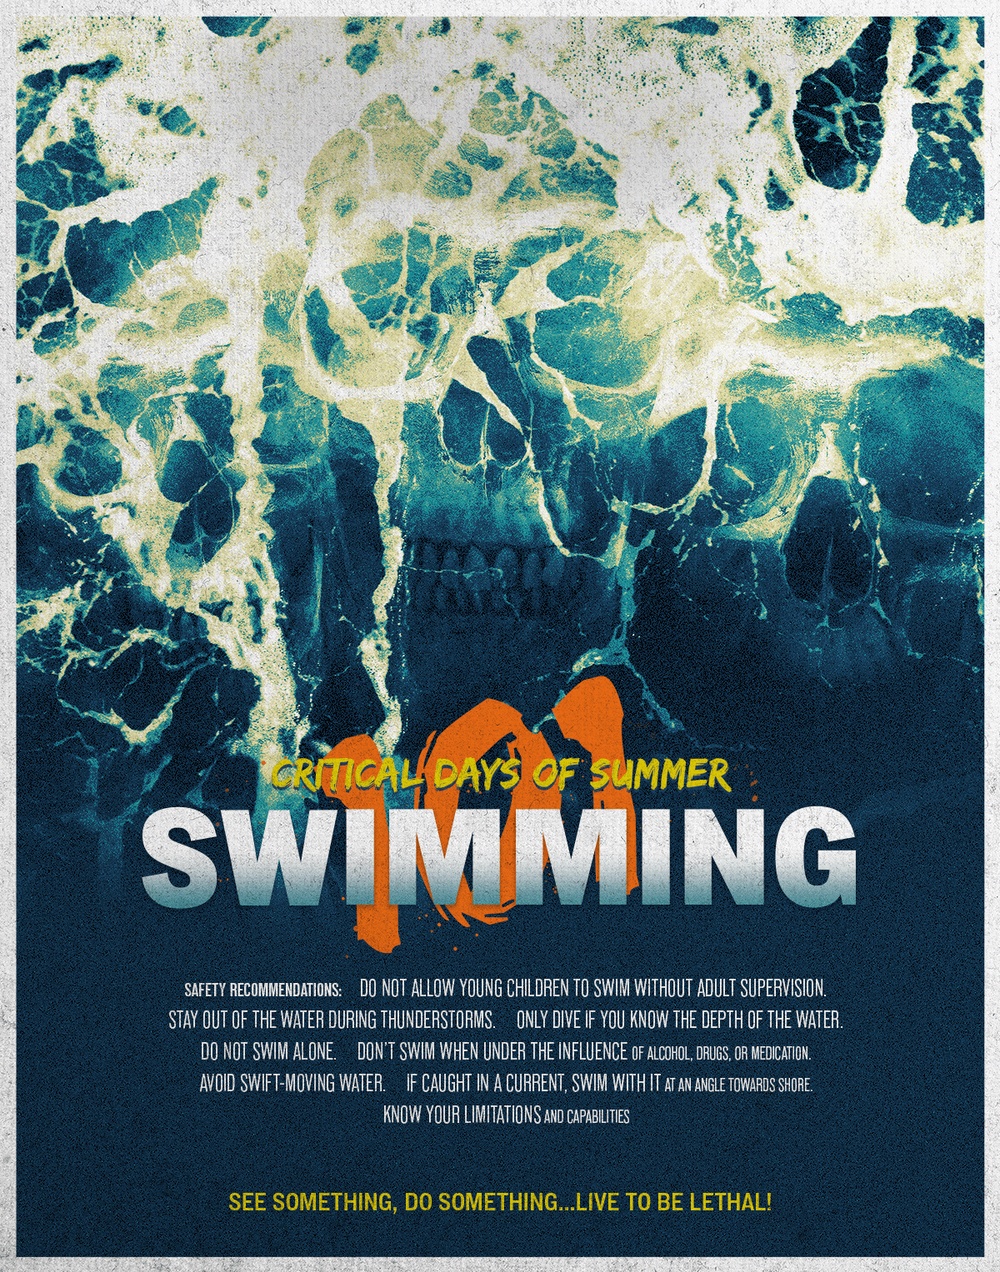 Presenting 101 Critical Days of Summer - Swimming